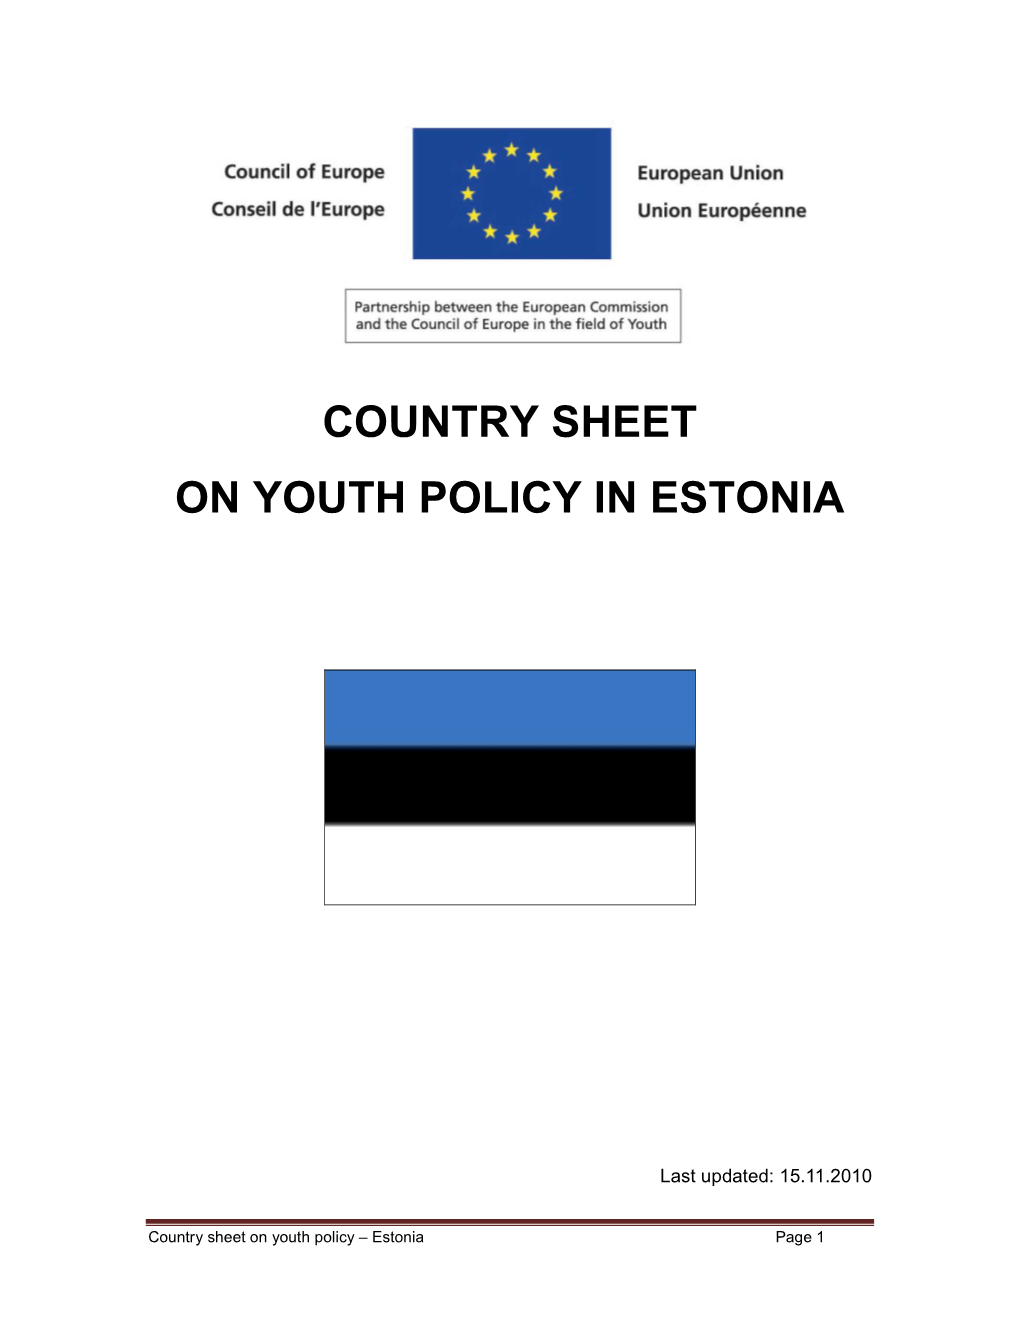 Country Sheet on Youth Policy in Estonia (2010)